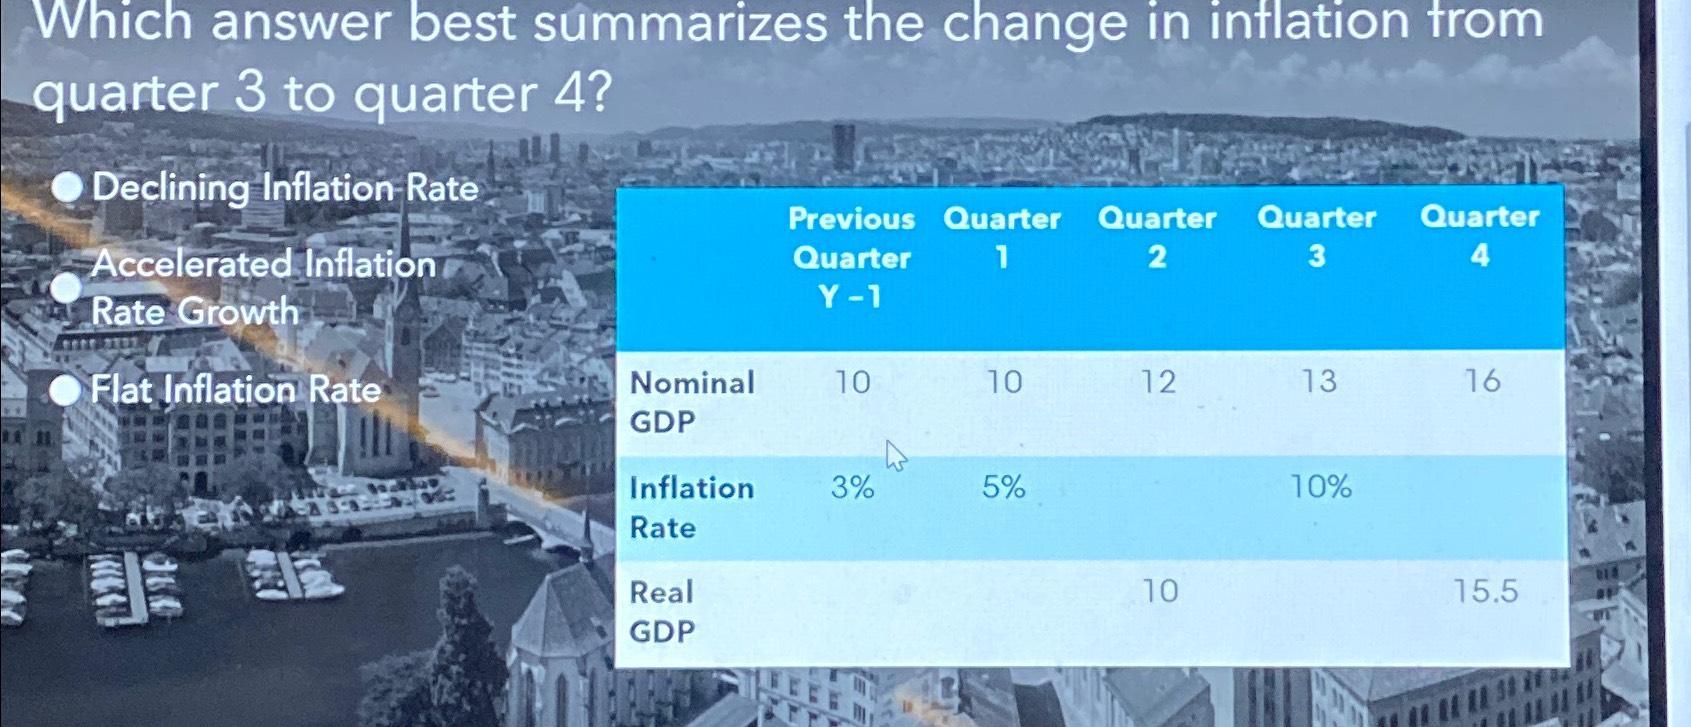 Which answer best summarizes the change in inflation from quarter 3 to quarter 4? Declining Inflation Rate